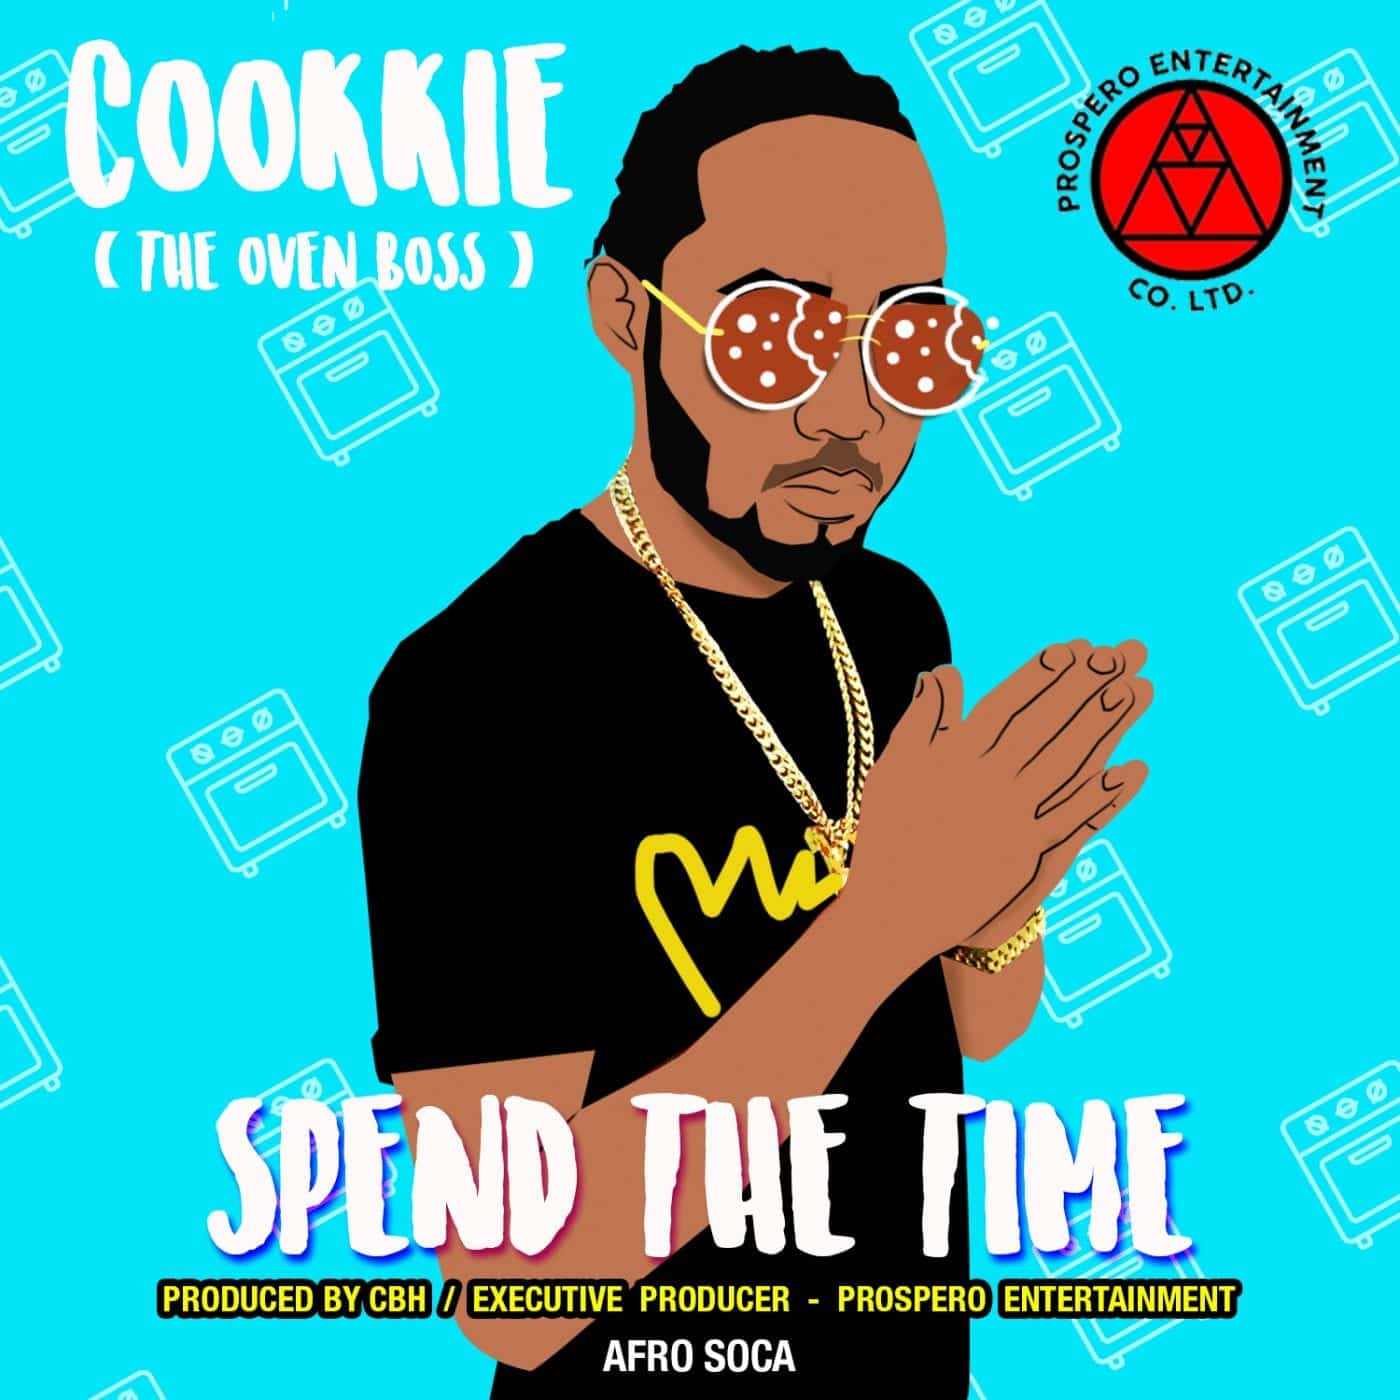 New Afro Soca From Cookkie - Spend the Time